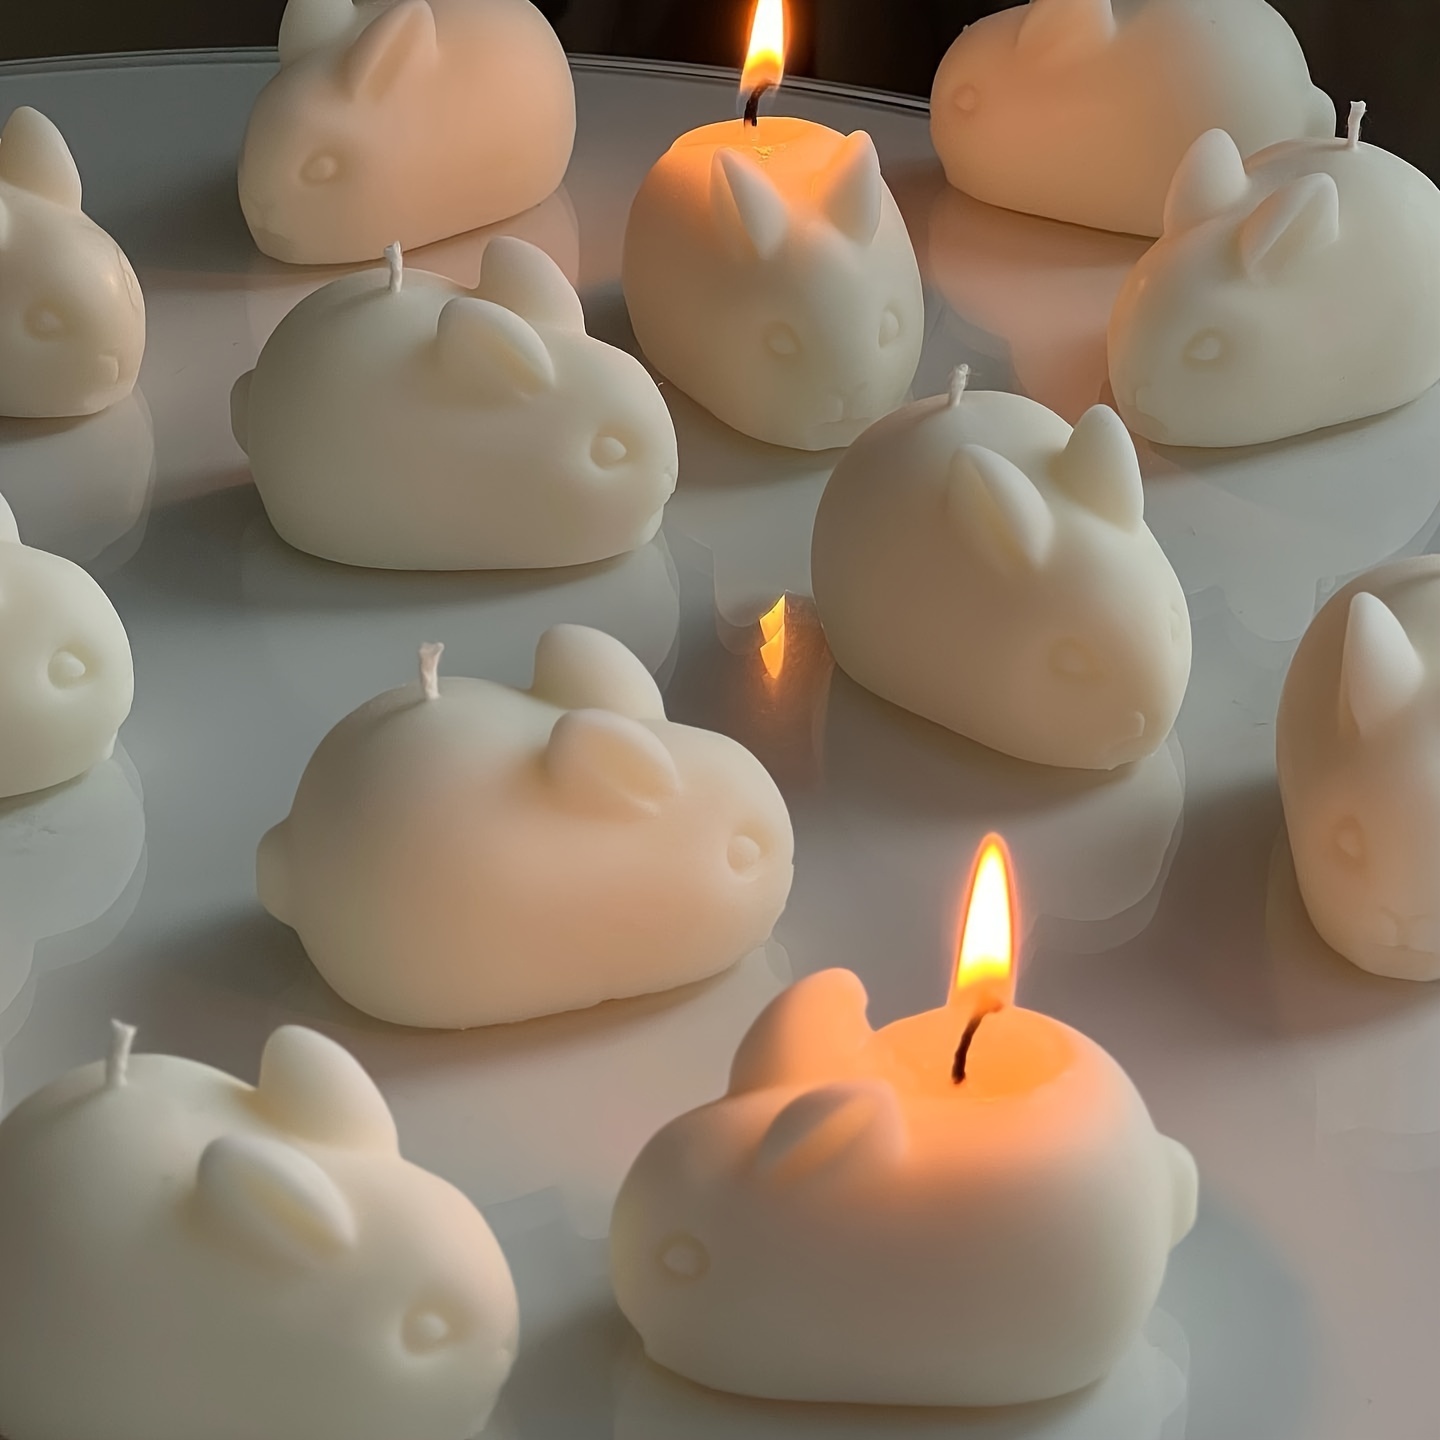 Bobasndm Candle molds Silicone, Easter Bunny Candle molds for Candle Making,Craft  Art Silicone Candle Molds or Craft soap Molds,DIY Handmade Candle molds for  Beeswax Candle 